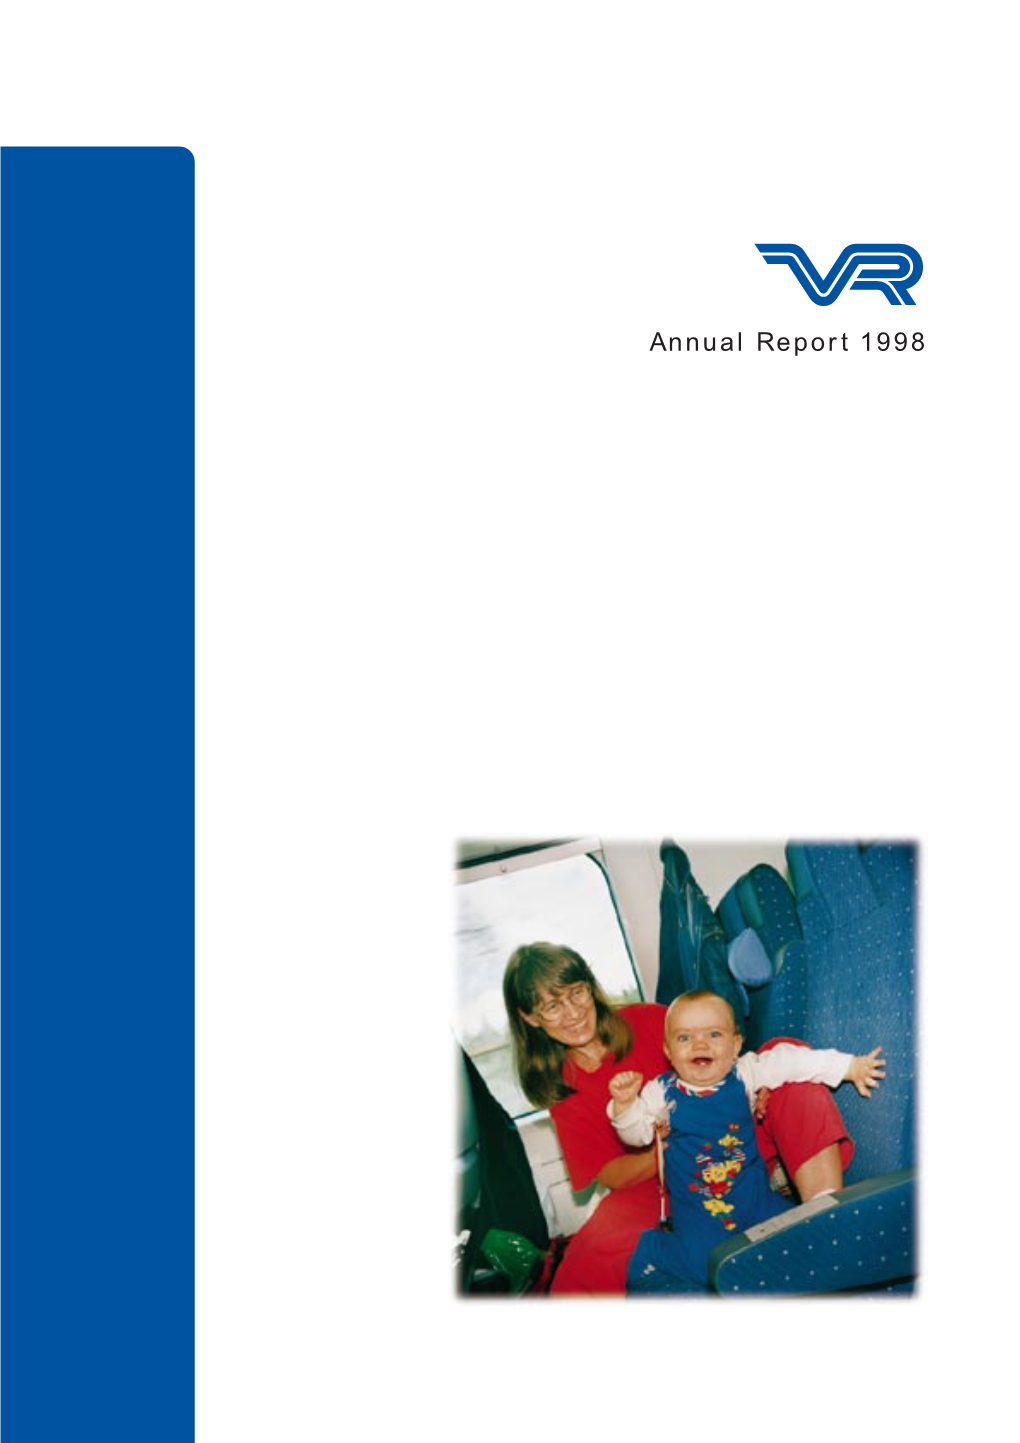 VR Group Annual Report 1998